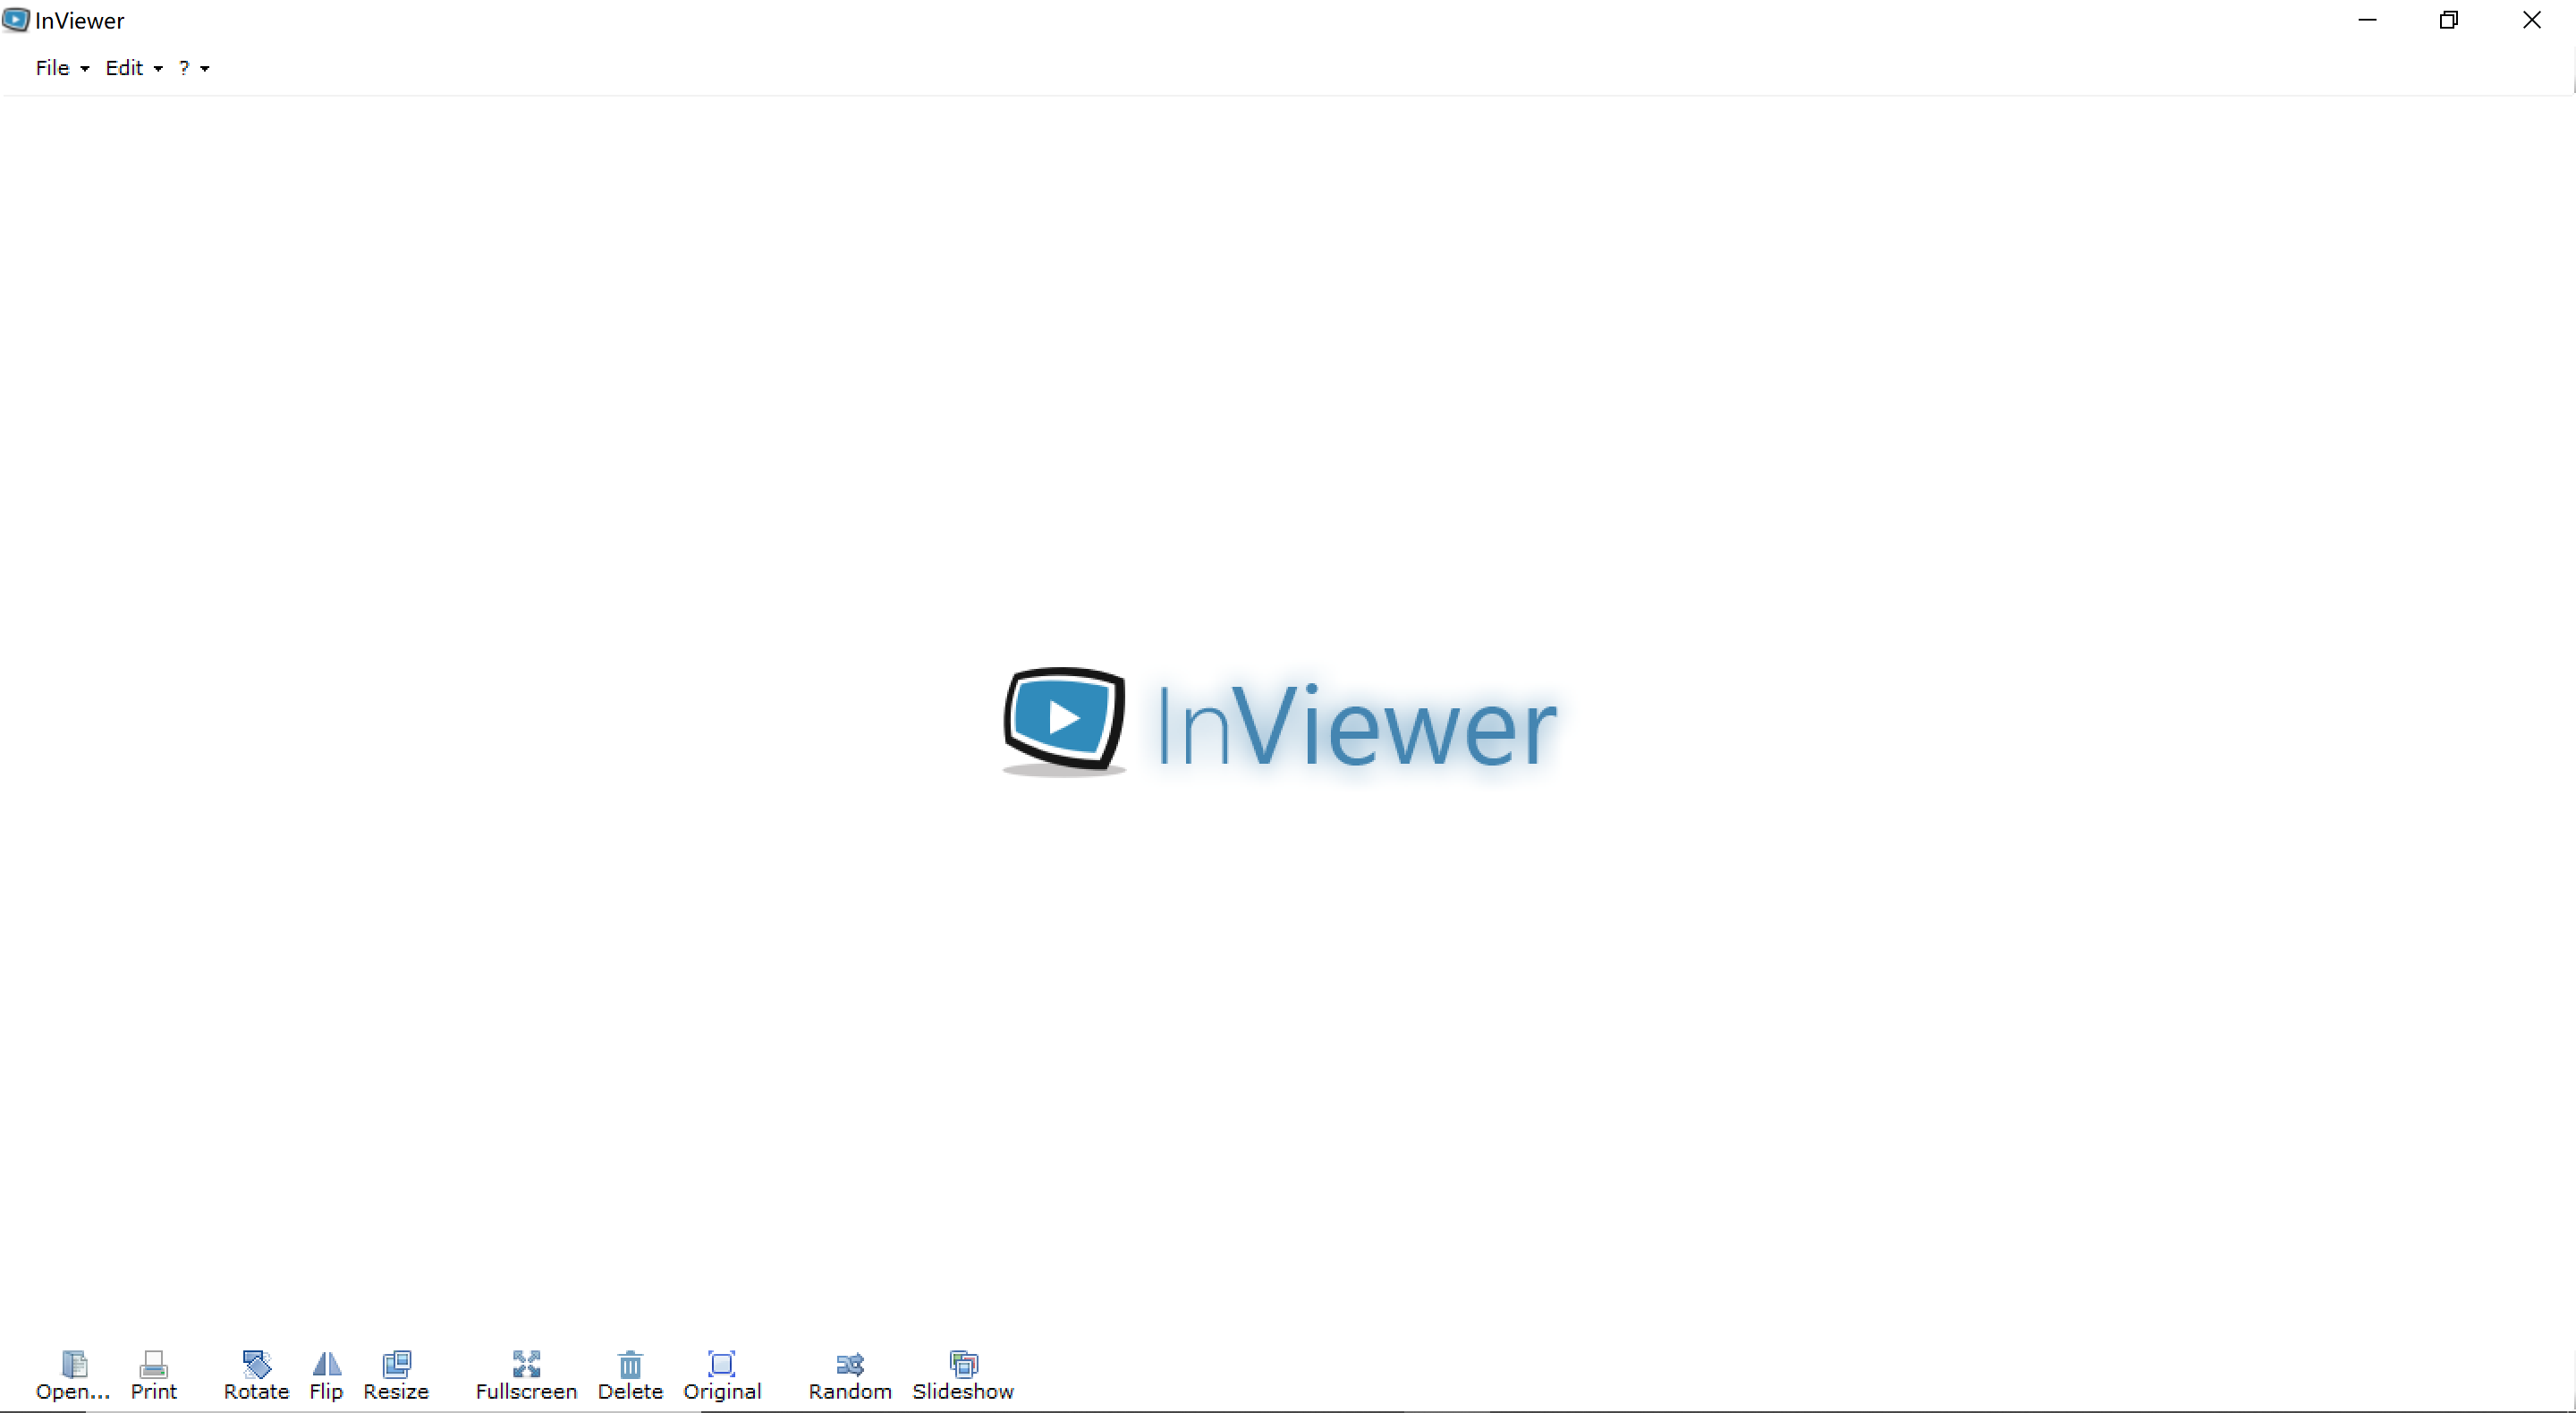 InViewer - View editor